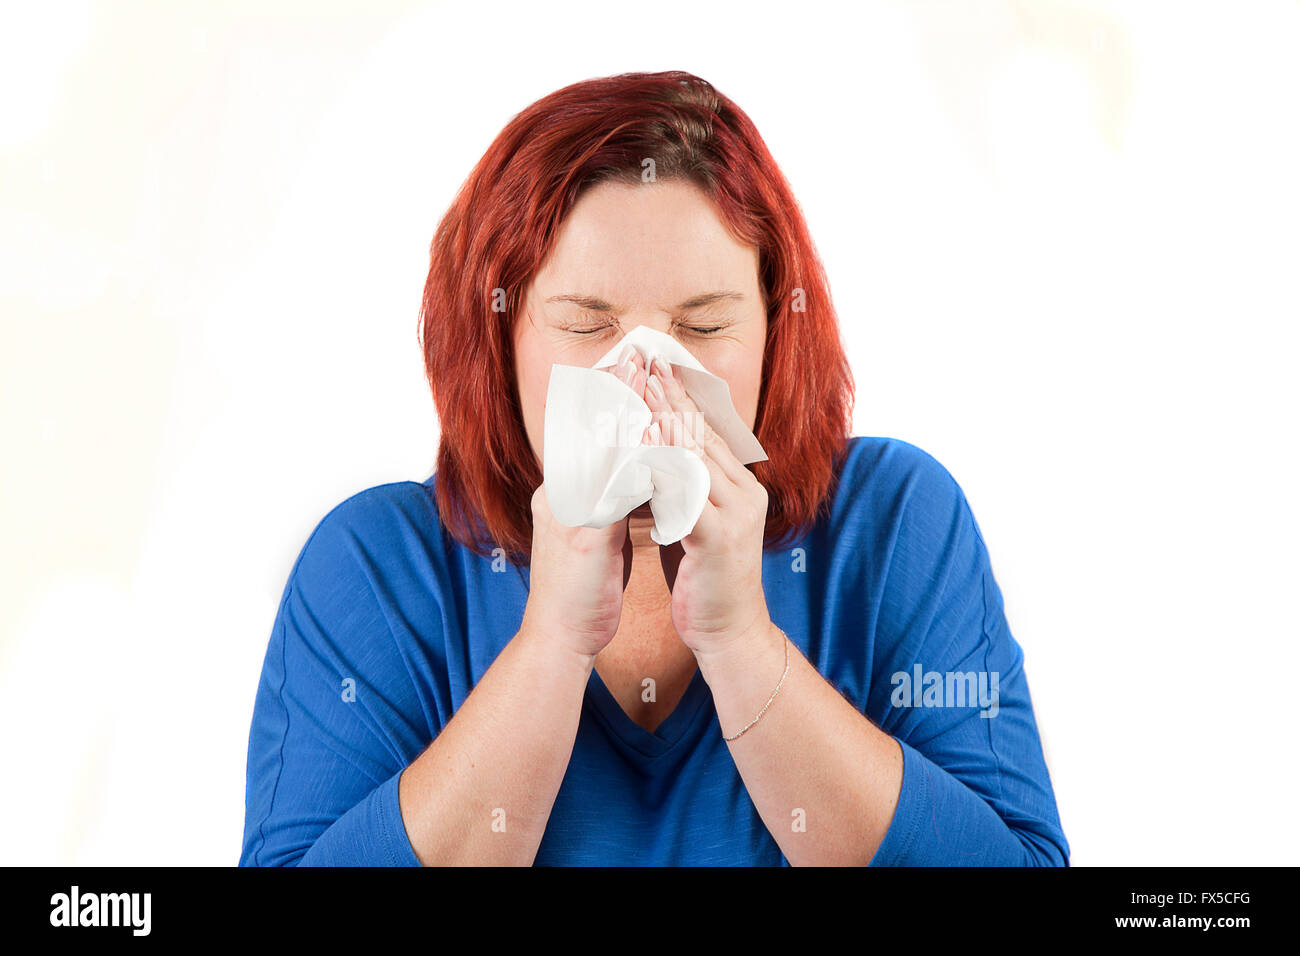 Woman with red hair blowing nose or sneezing Stock Photo